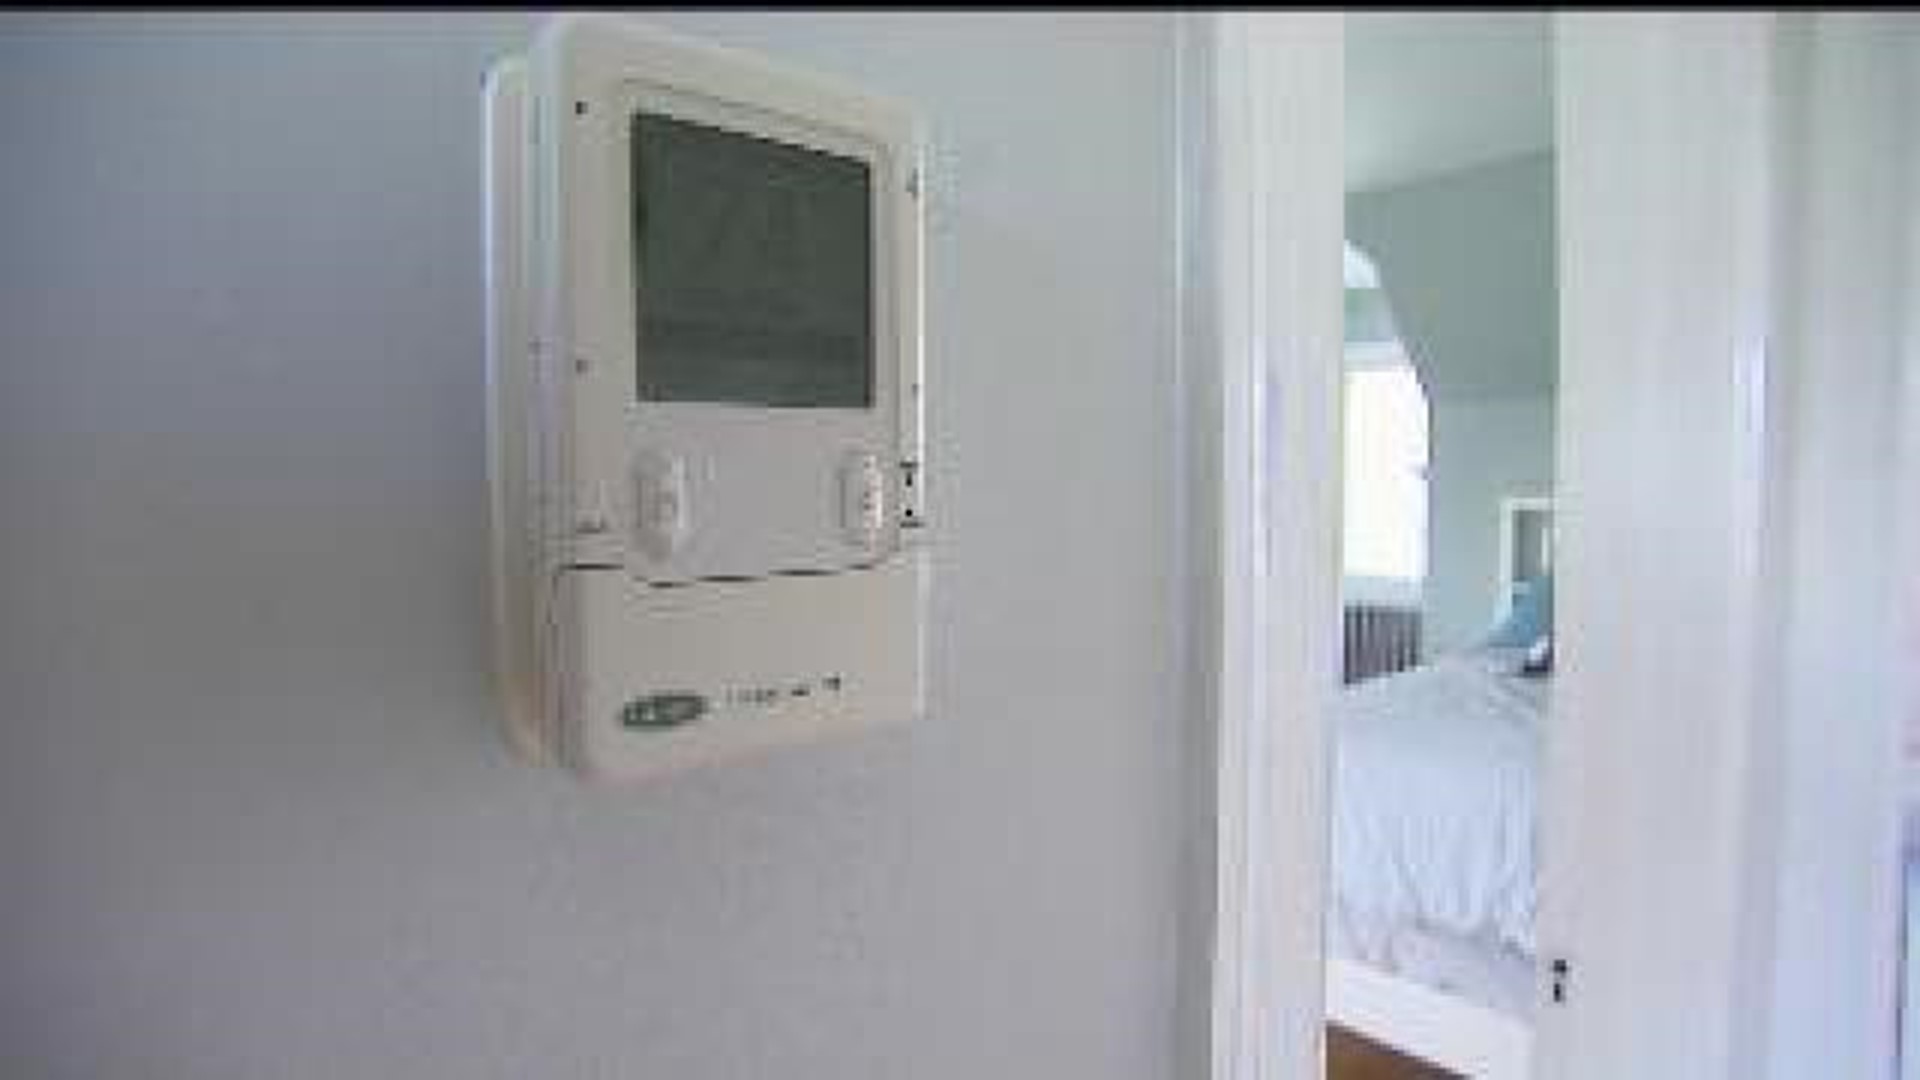 Iowa Senate approves extra funds for heating assistance